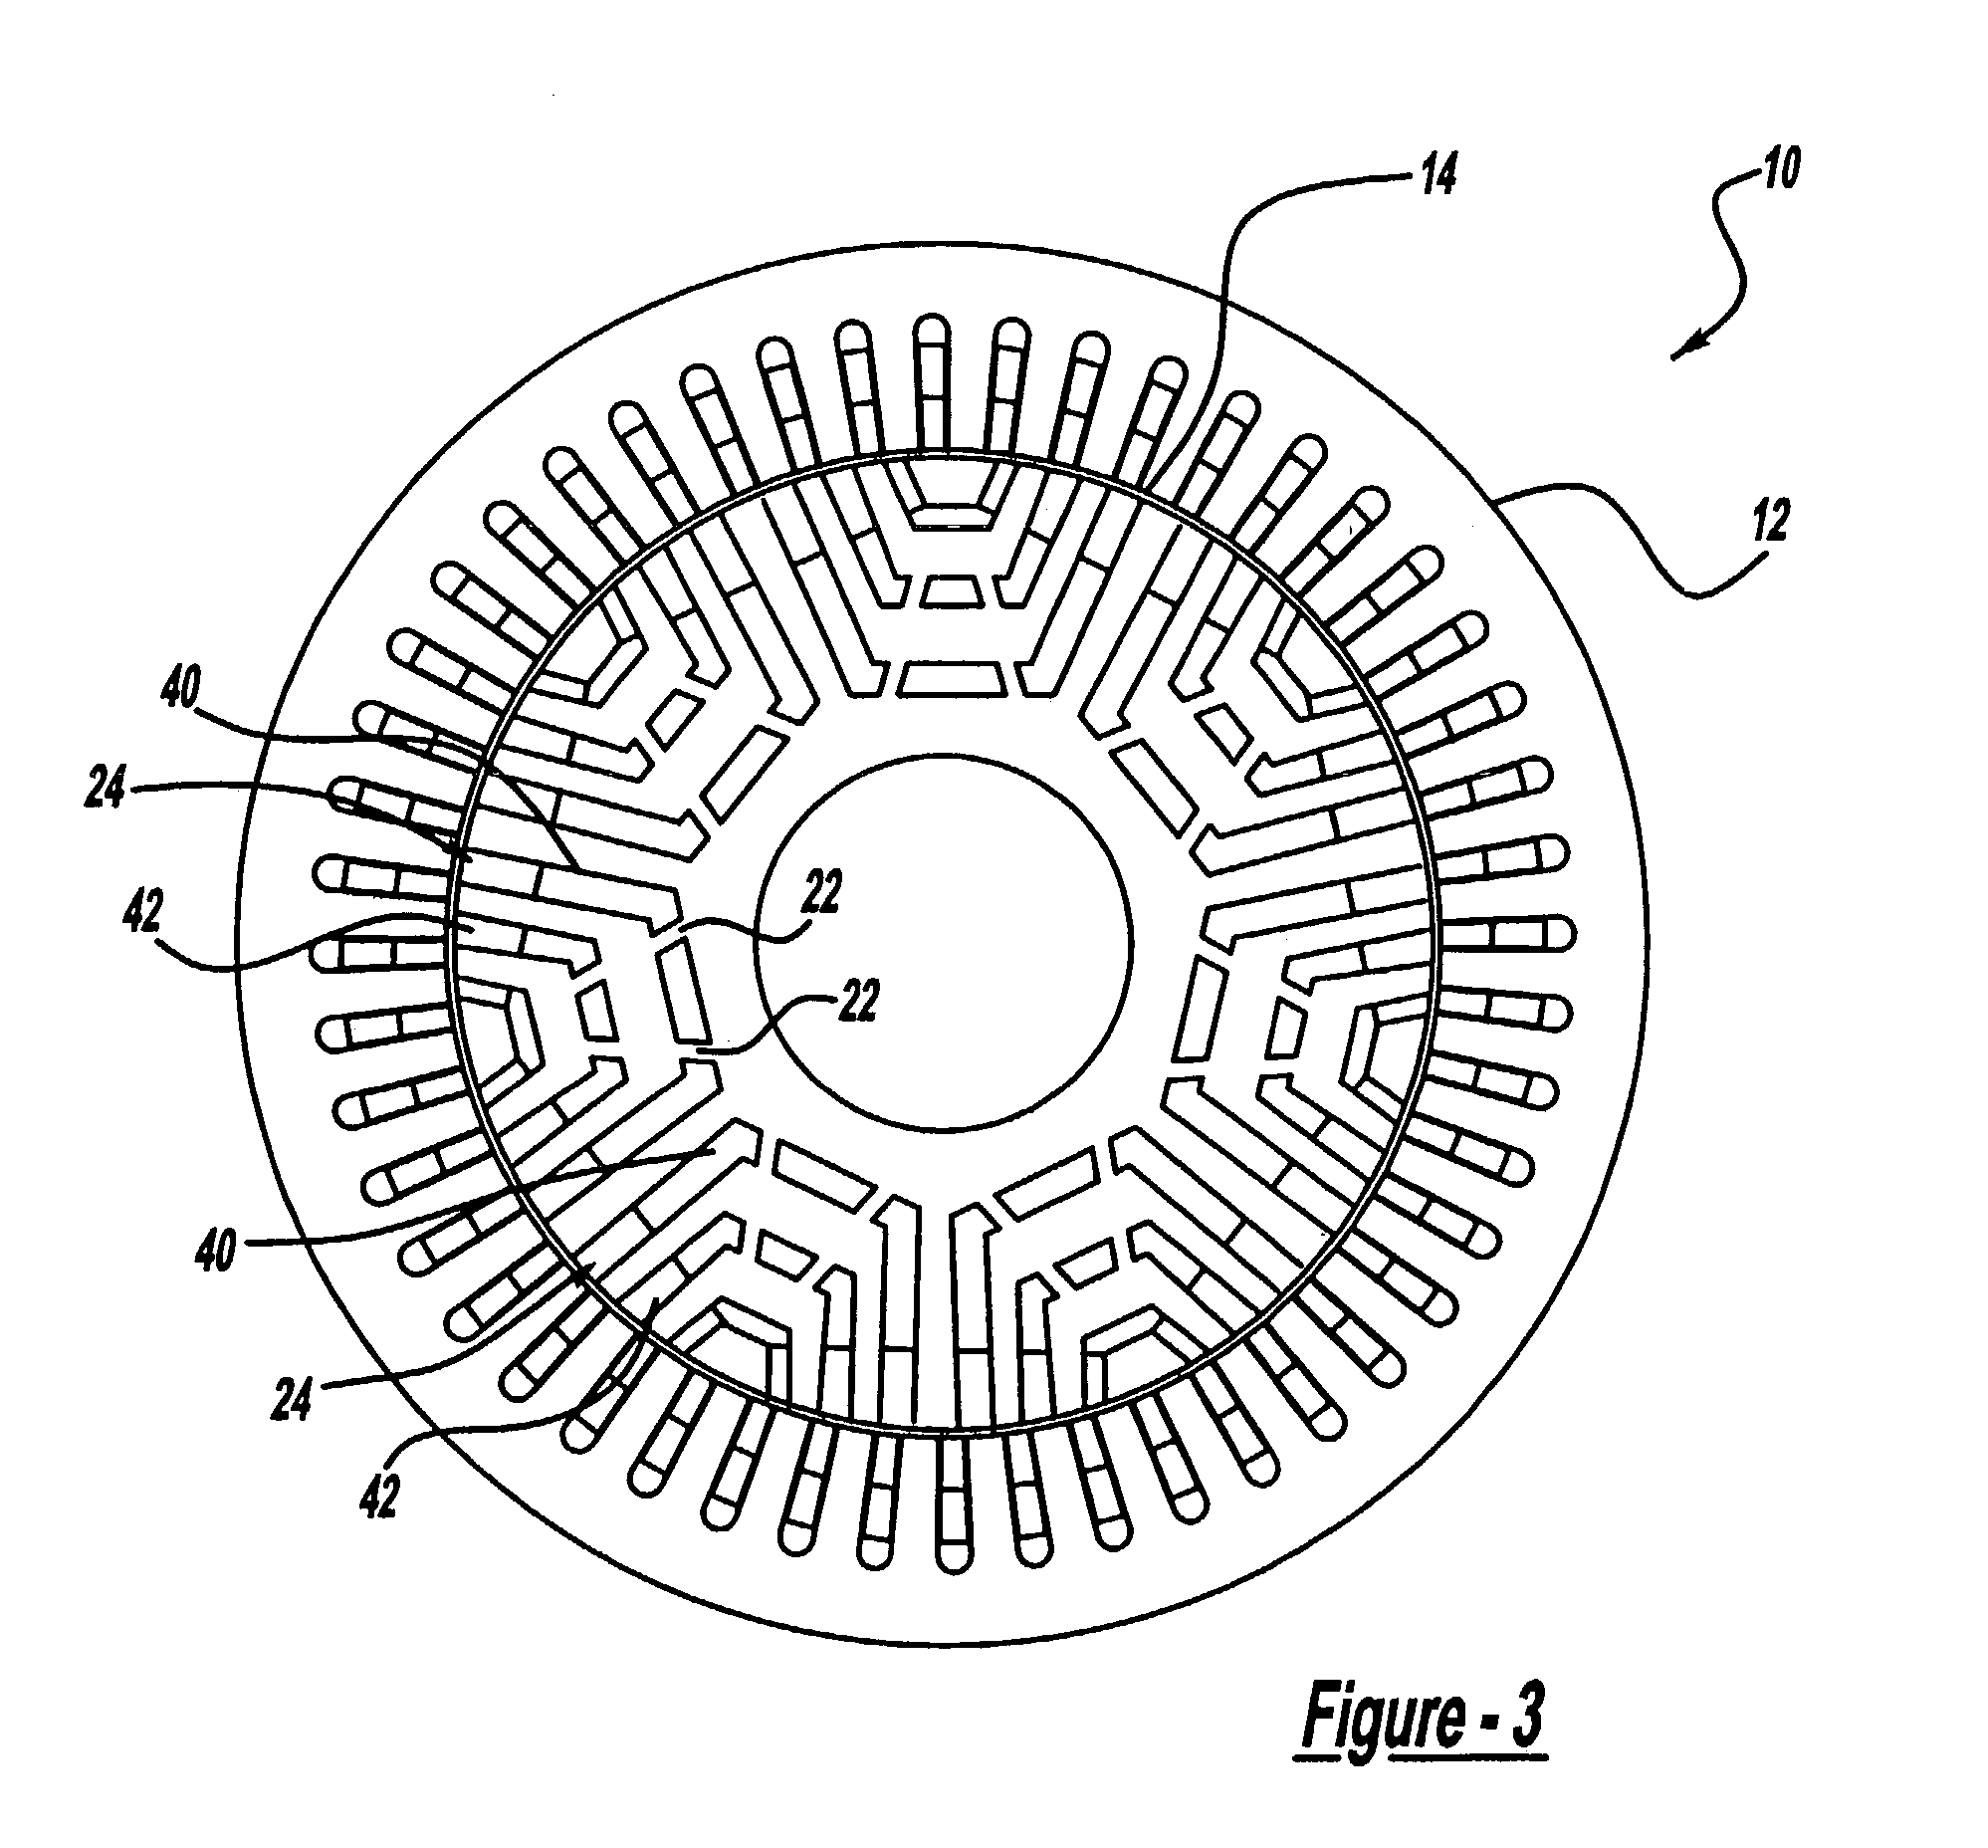 Method of fabricating a rotor